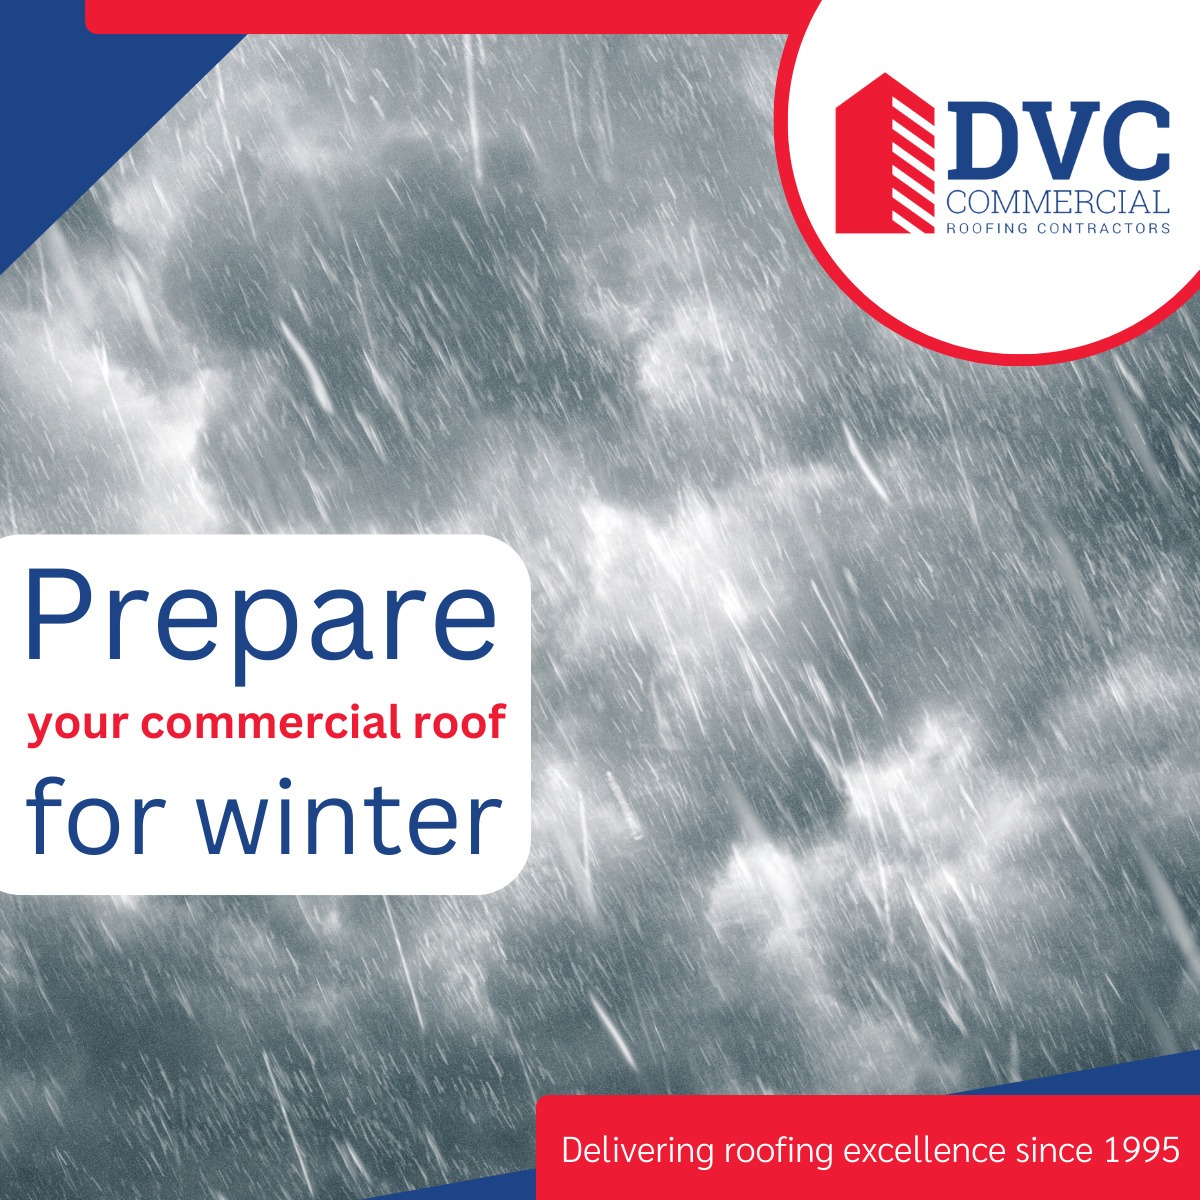 Prepare your commercial roof for winter